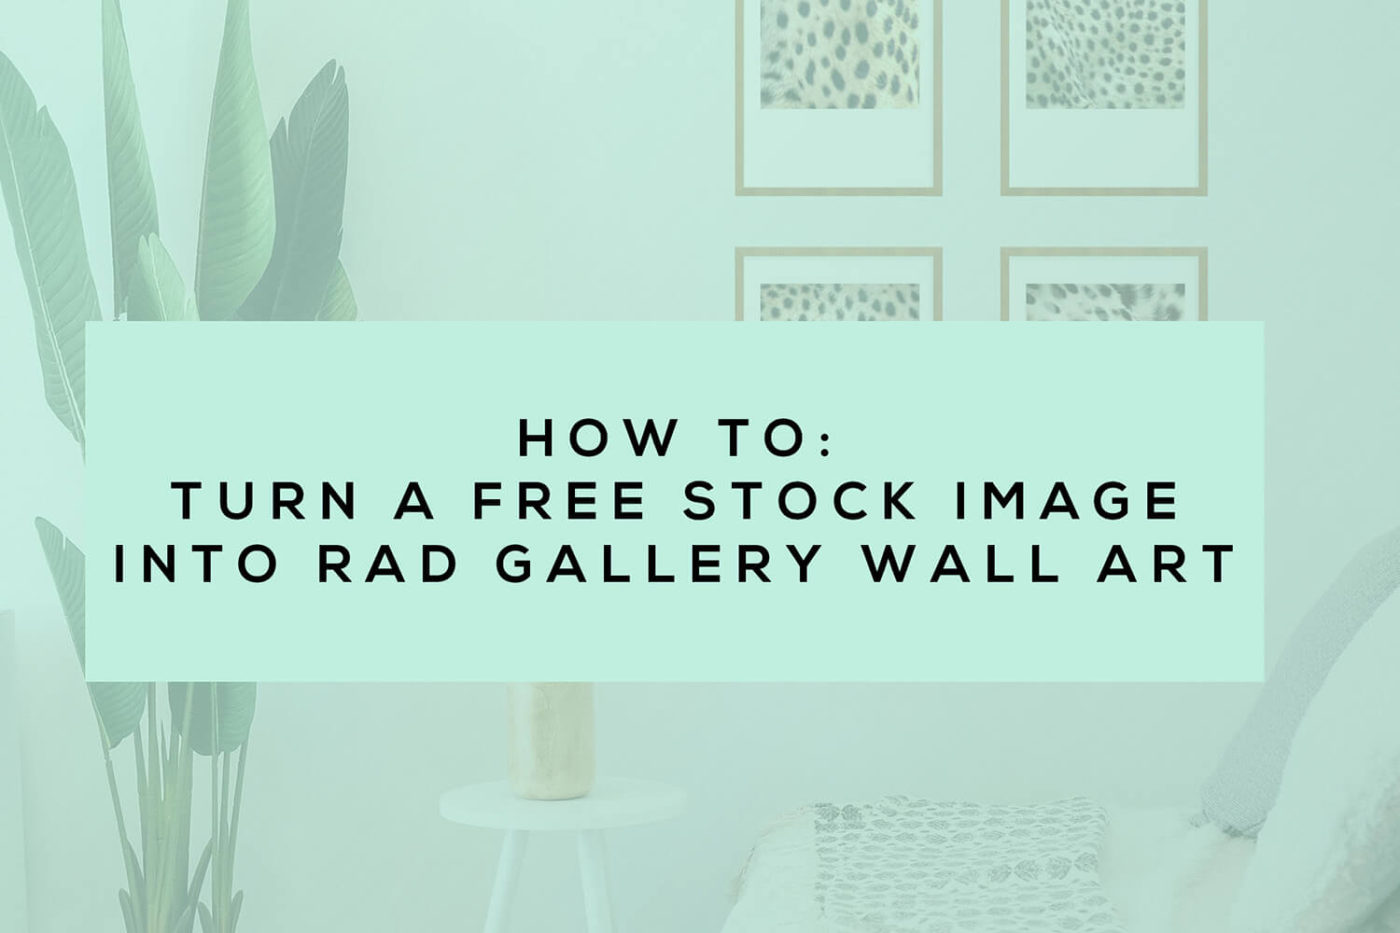 How to Turn a Free Stock Image Into Rad Gallery Wall Art • Little Gold Pixel • In which I show you how to turn stock photos into free abstract art in an easy walk-through video and step-by-step tutorial.